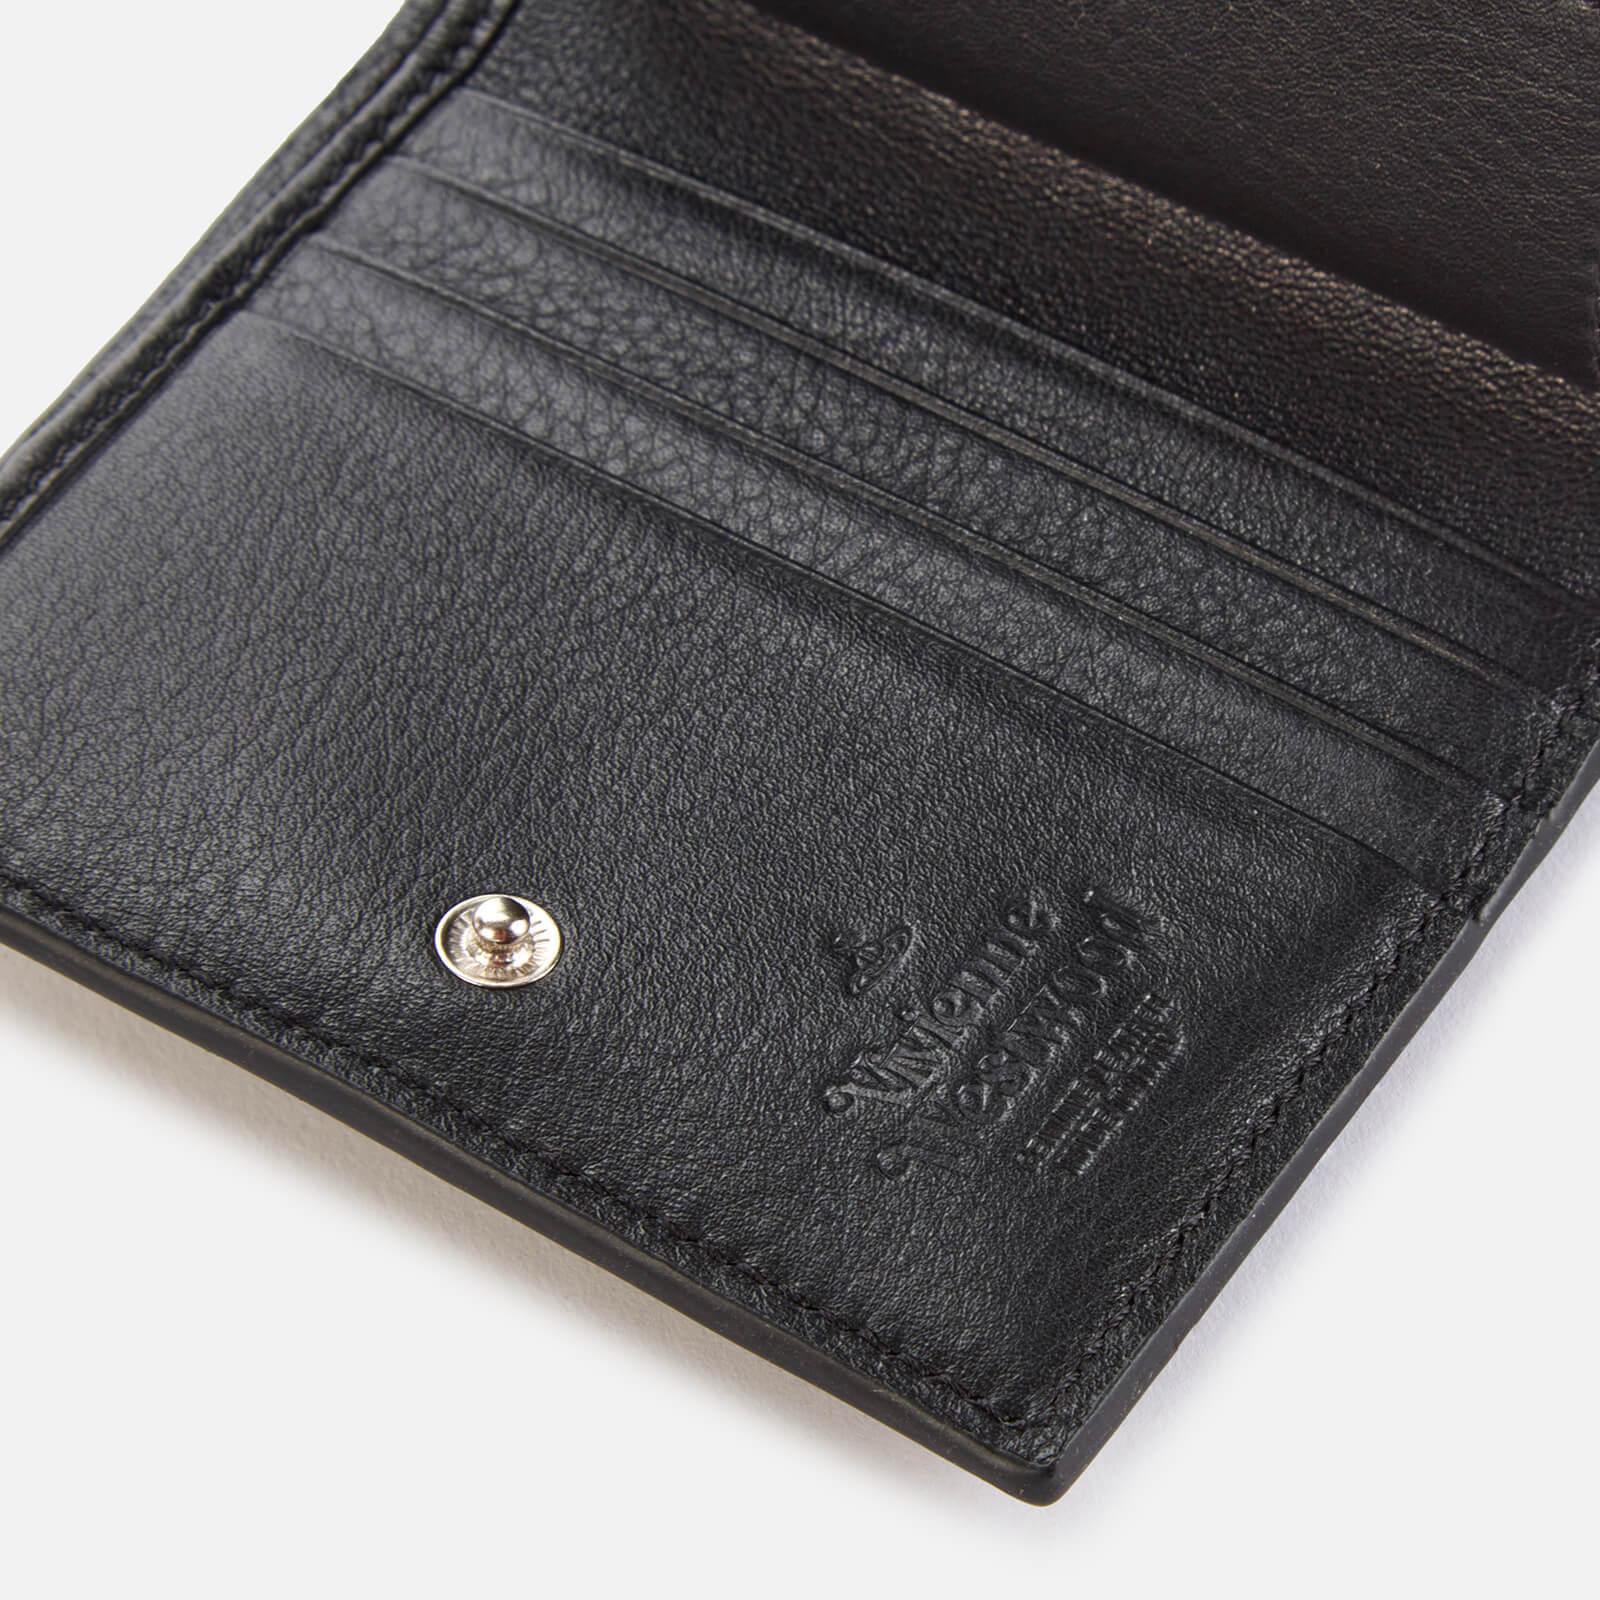 Chelsea Leather Wallet